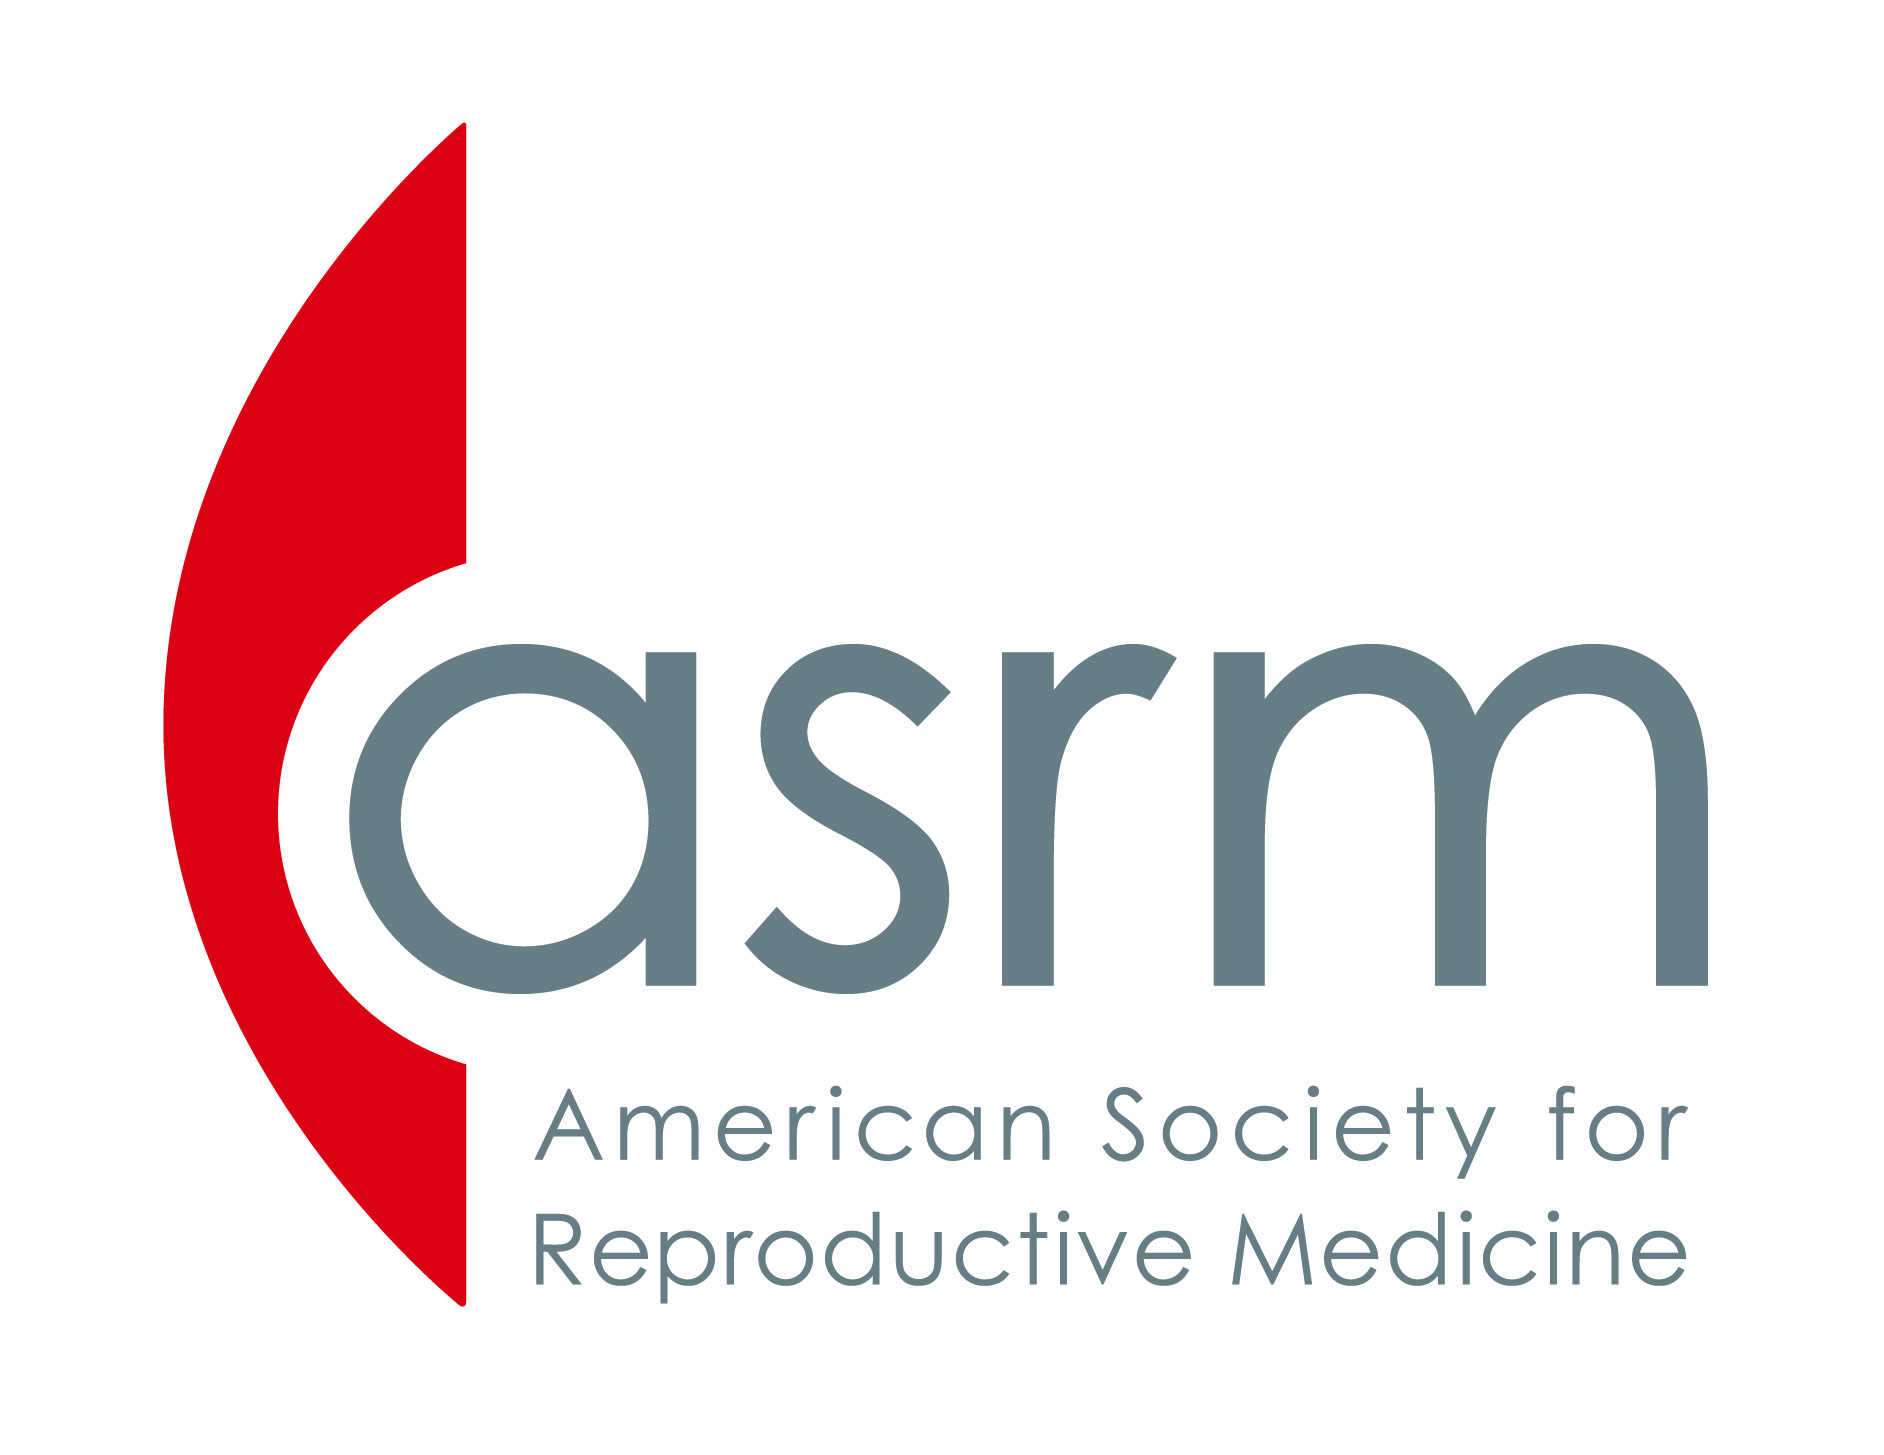 Family Makers is a member of ASRM